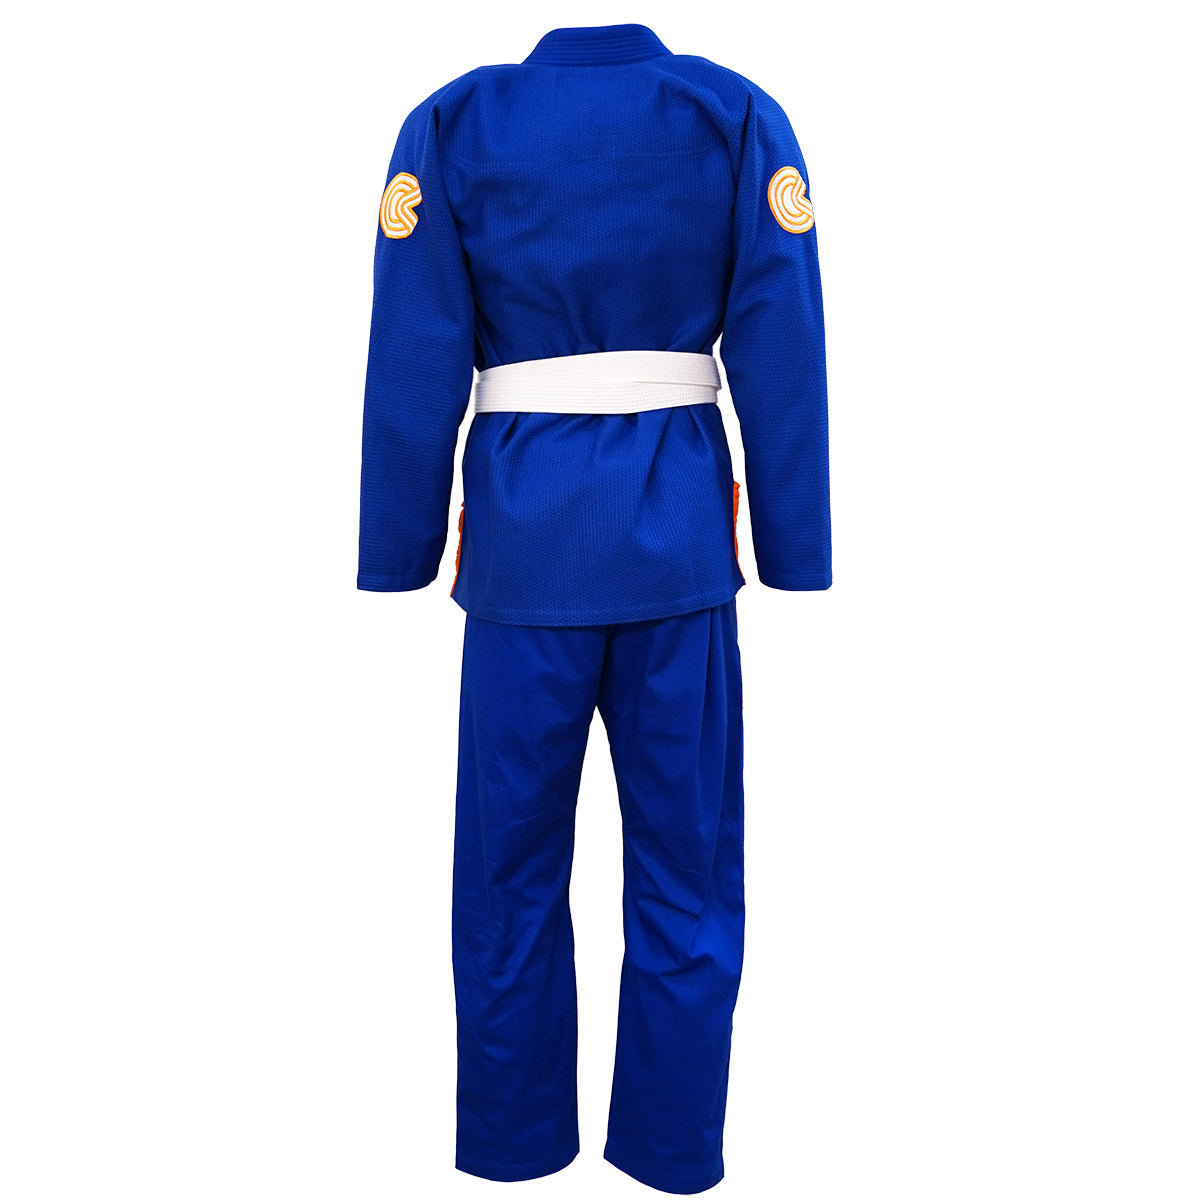 Chaos and Order Base Label V2 BJJ Gi - Blue Chaos and Order